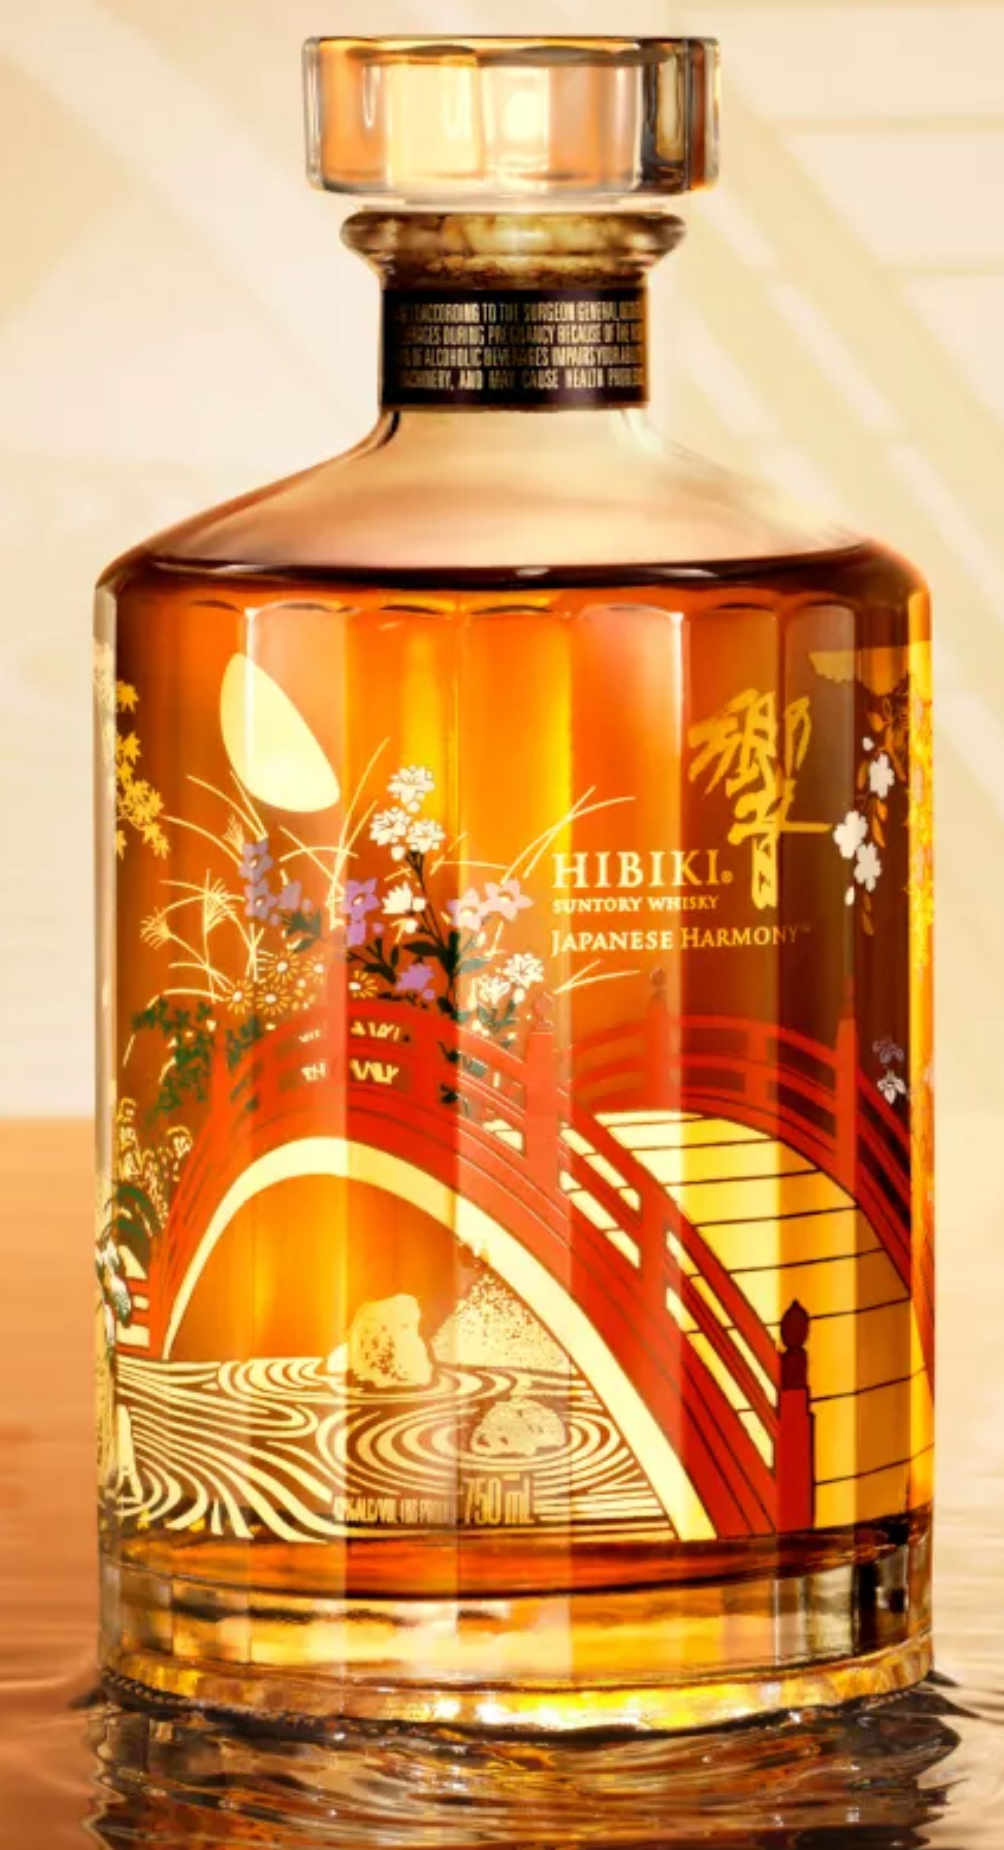 Hibiki Whiskey Harmony 100th Anniversary Edition 750mL a round shaped circular clear glass bottle with an image of a Japanese garden bridge on the front